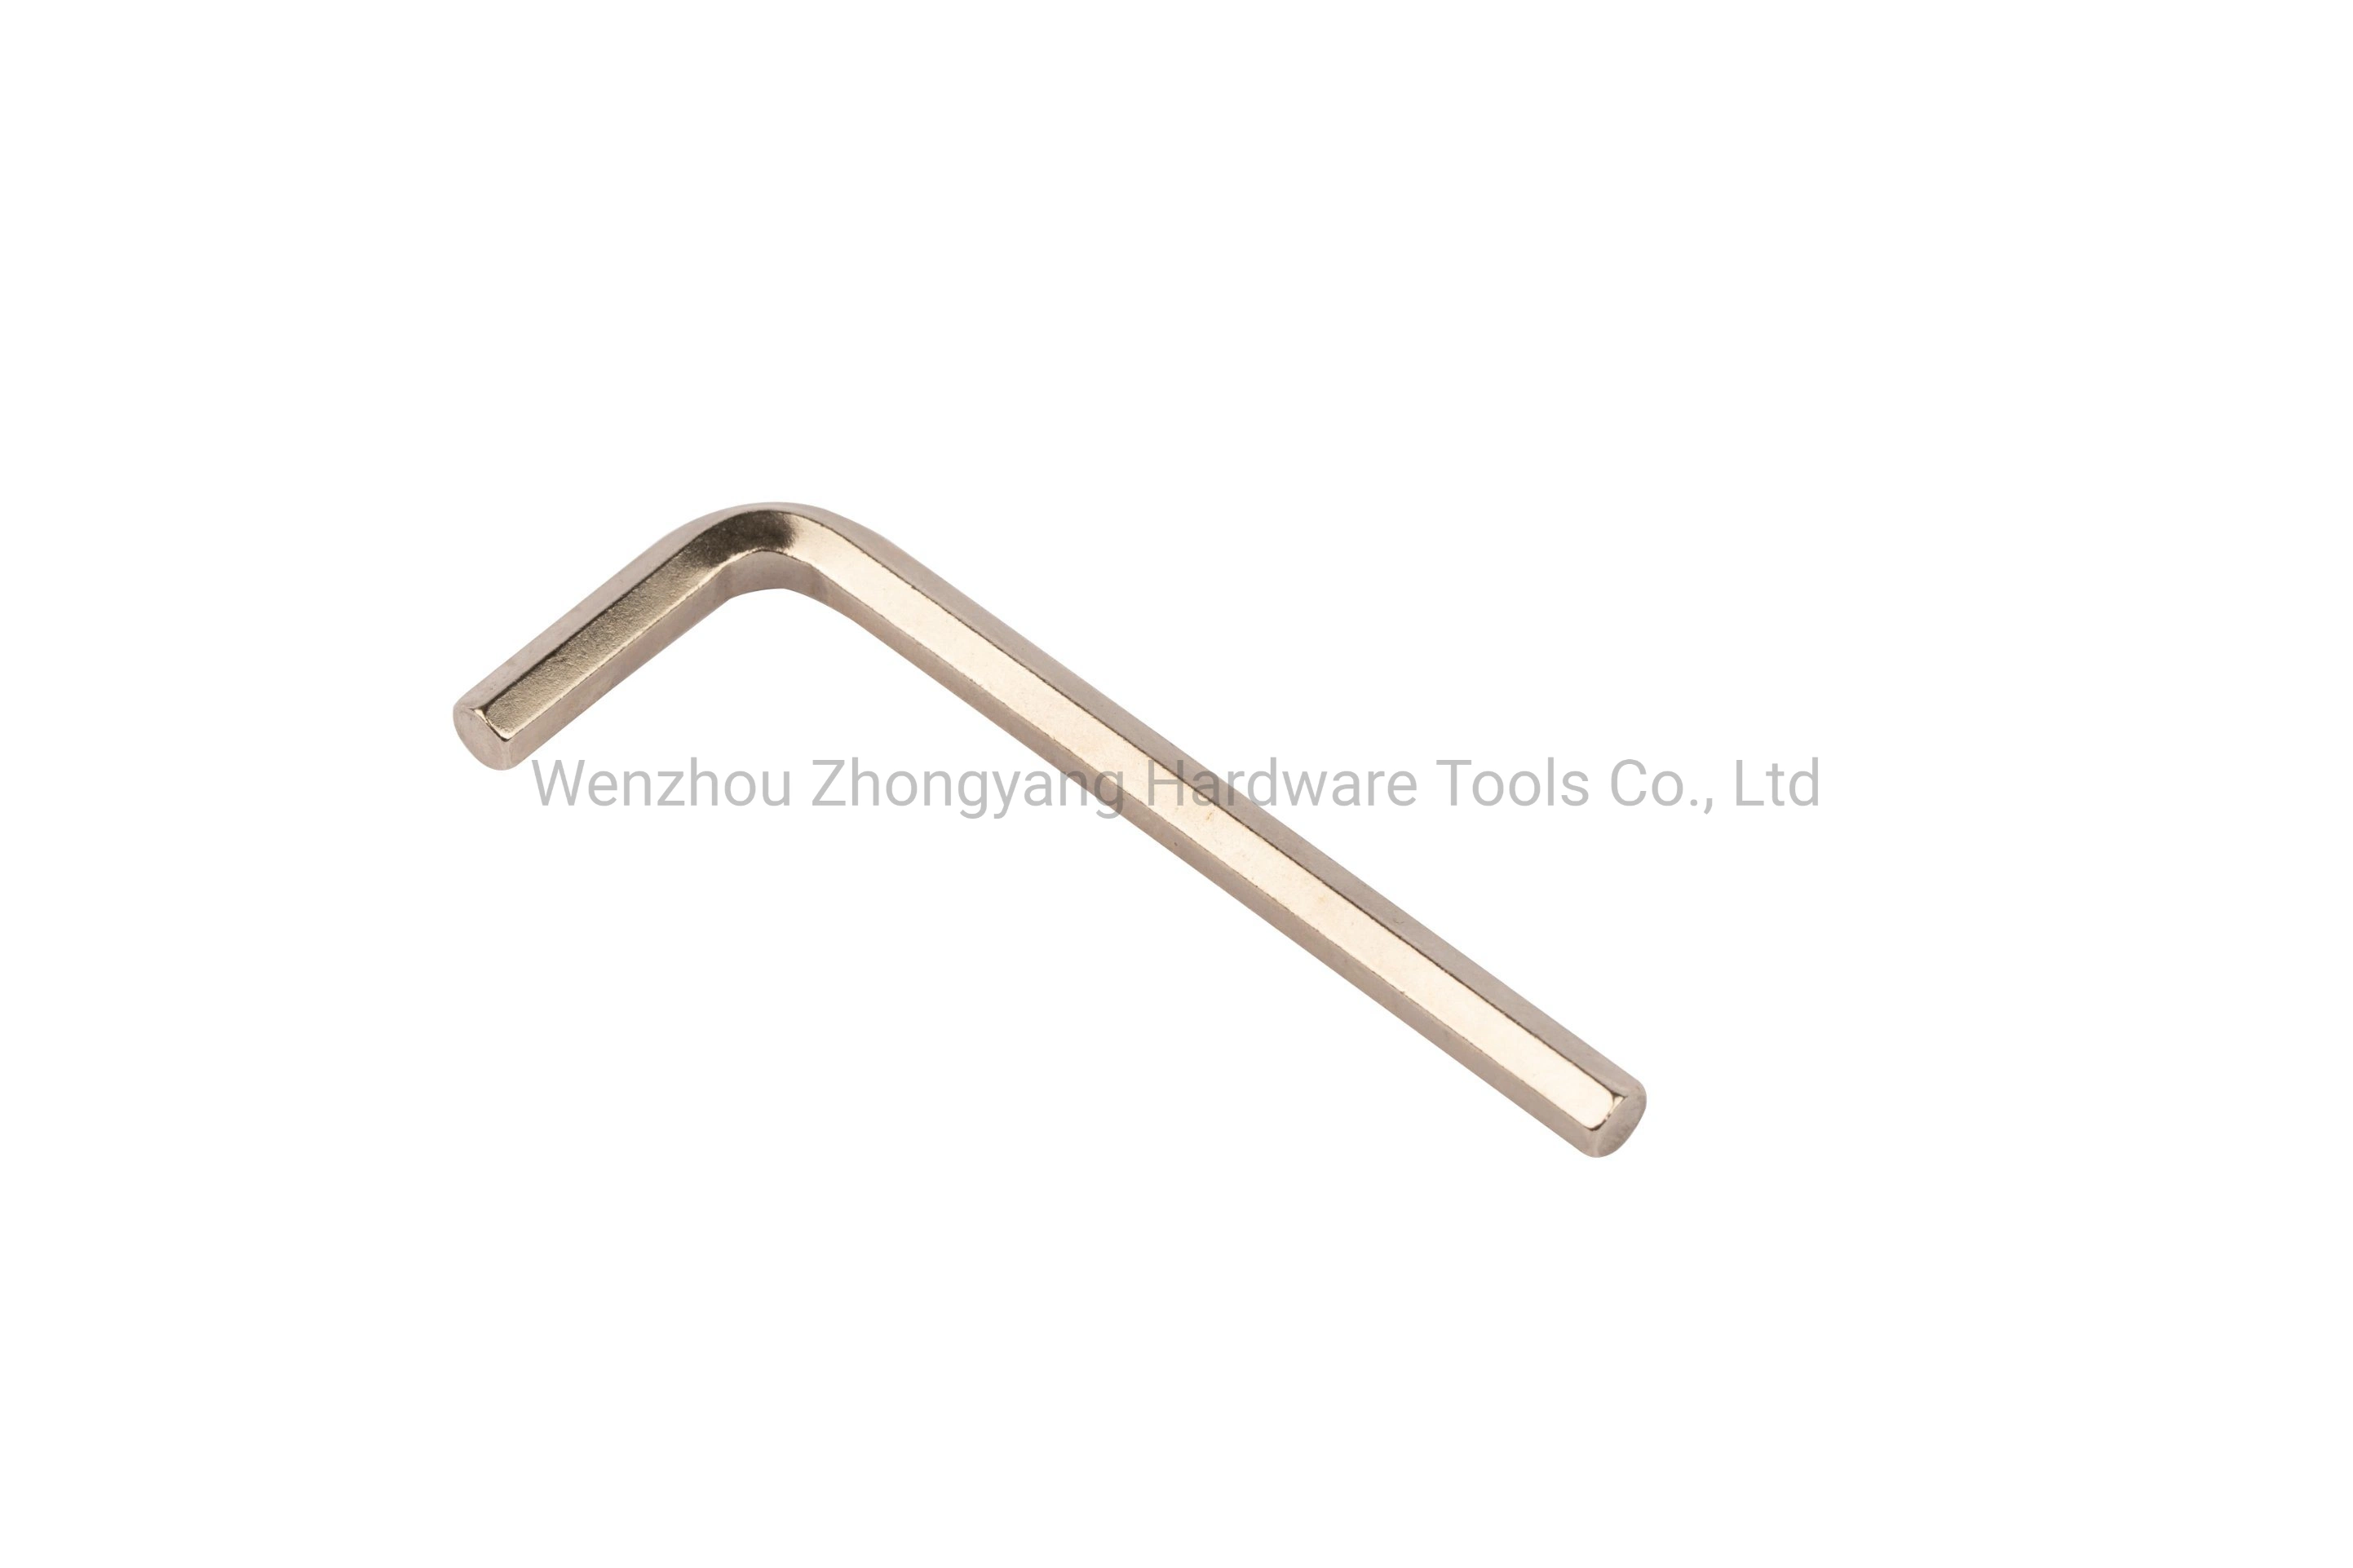 2022 Chinese Factory Supply Allen Hex Wrench Allen Key DIN 911 Hand Tool.